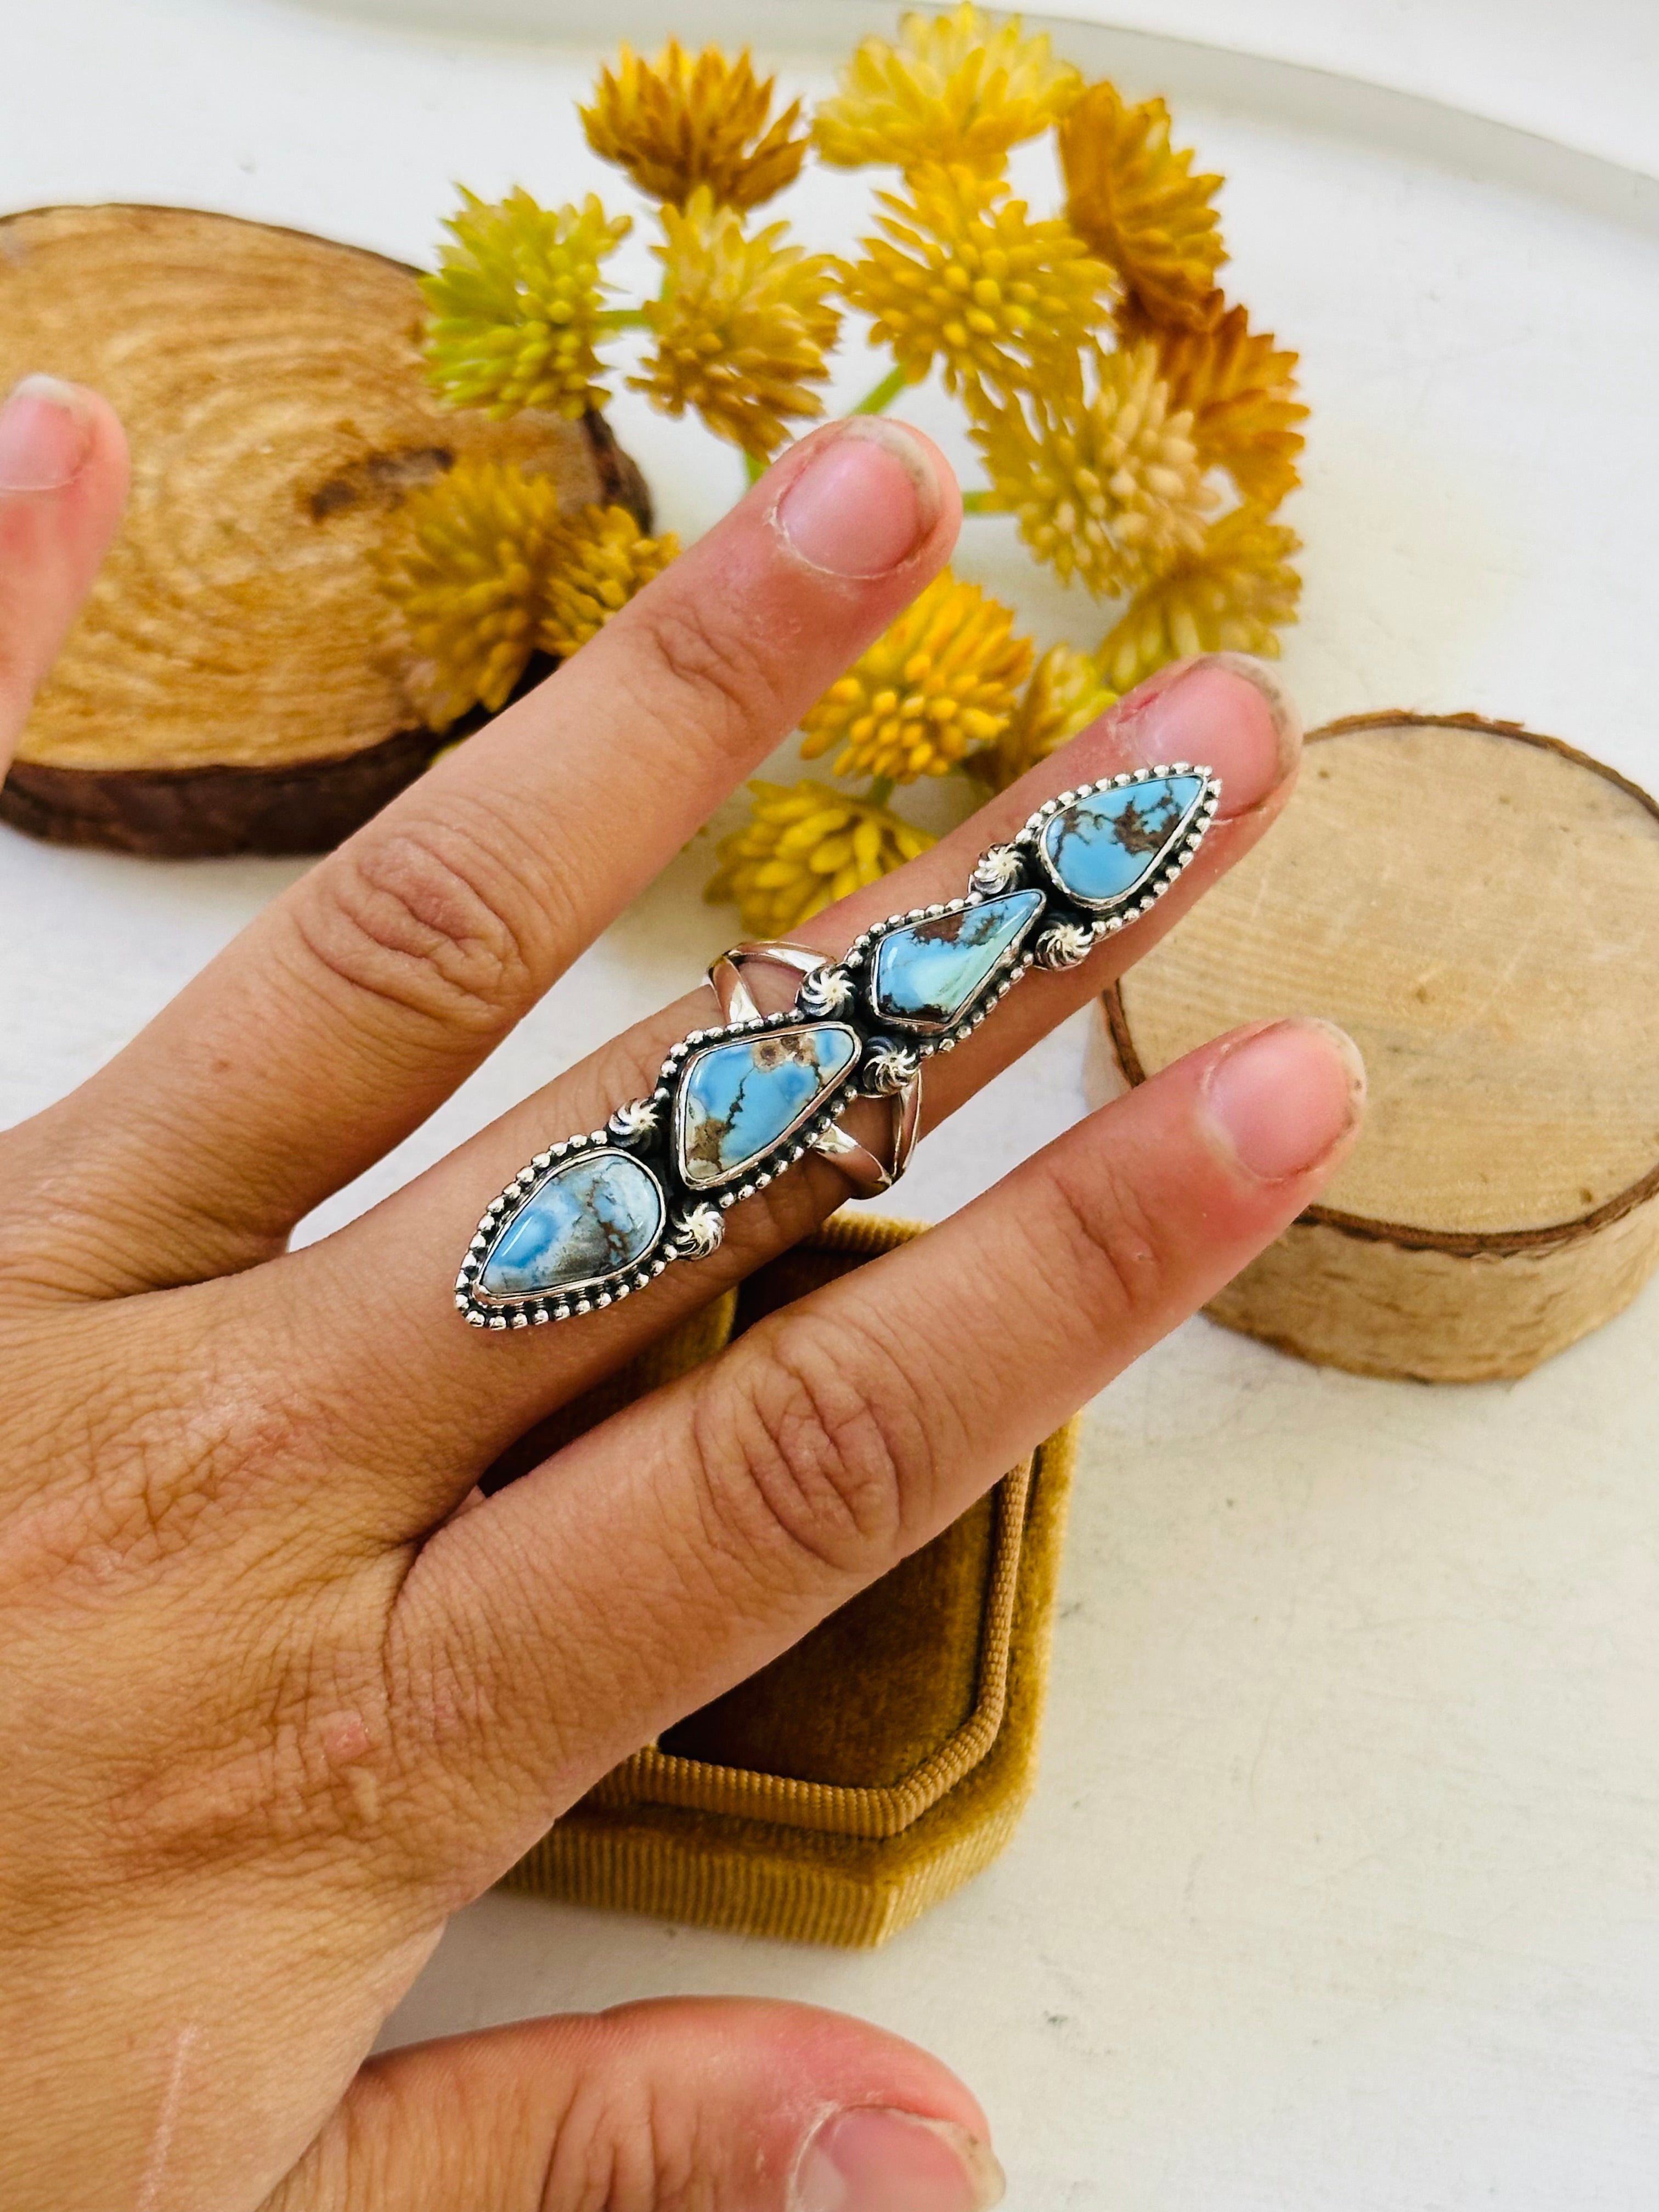 Southwest Handmade Golden Hills Turquoise & Sterling Silver Ring Size 6.25